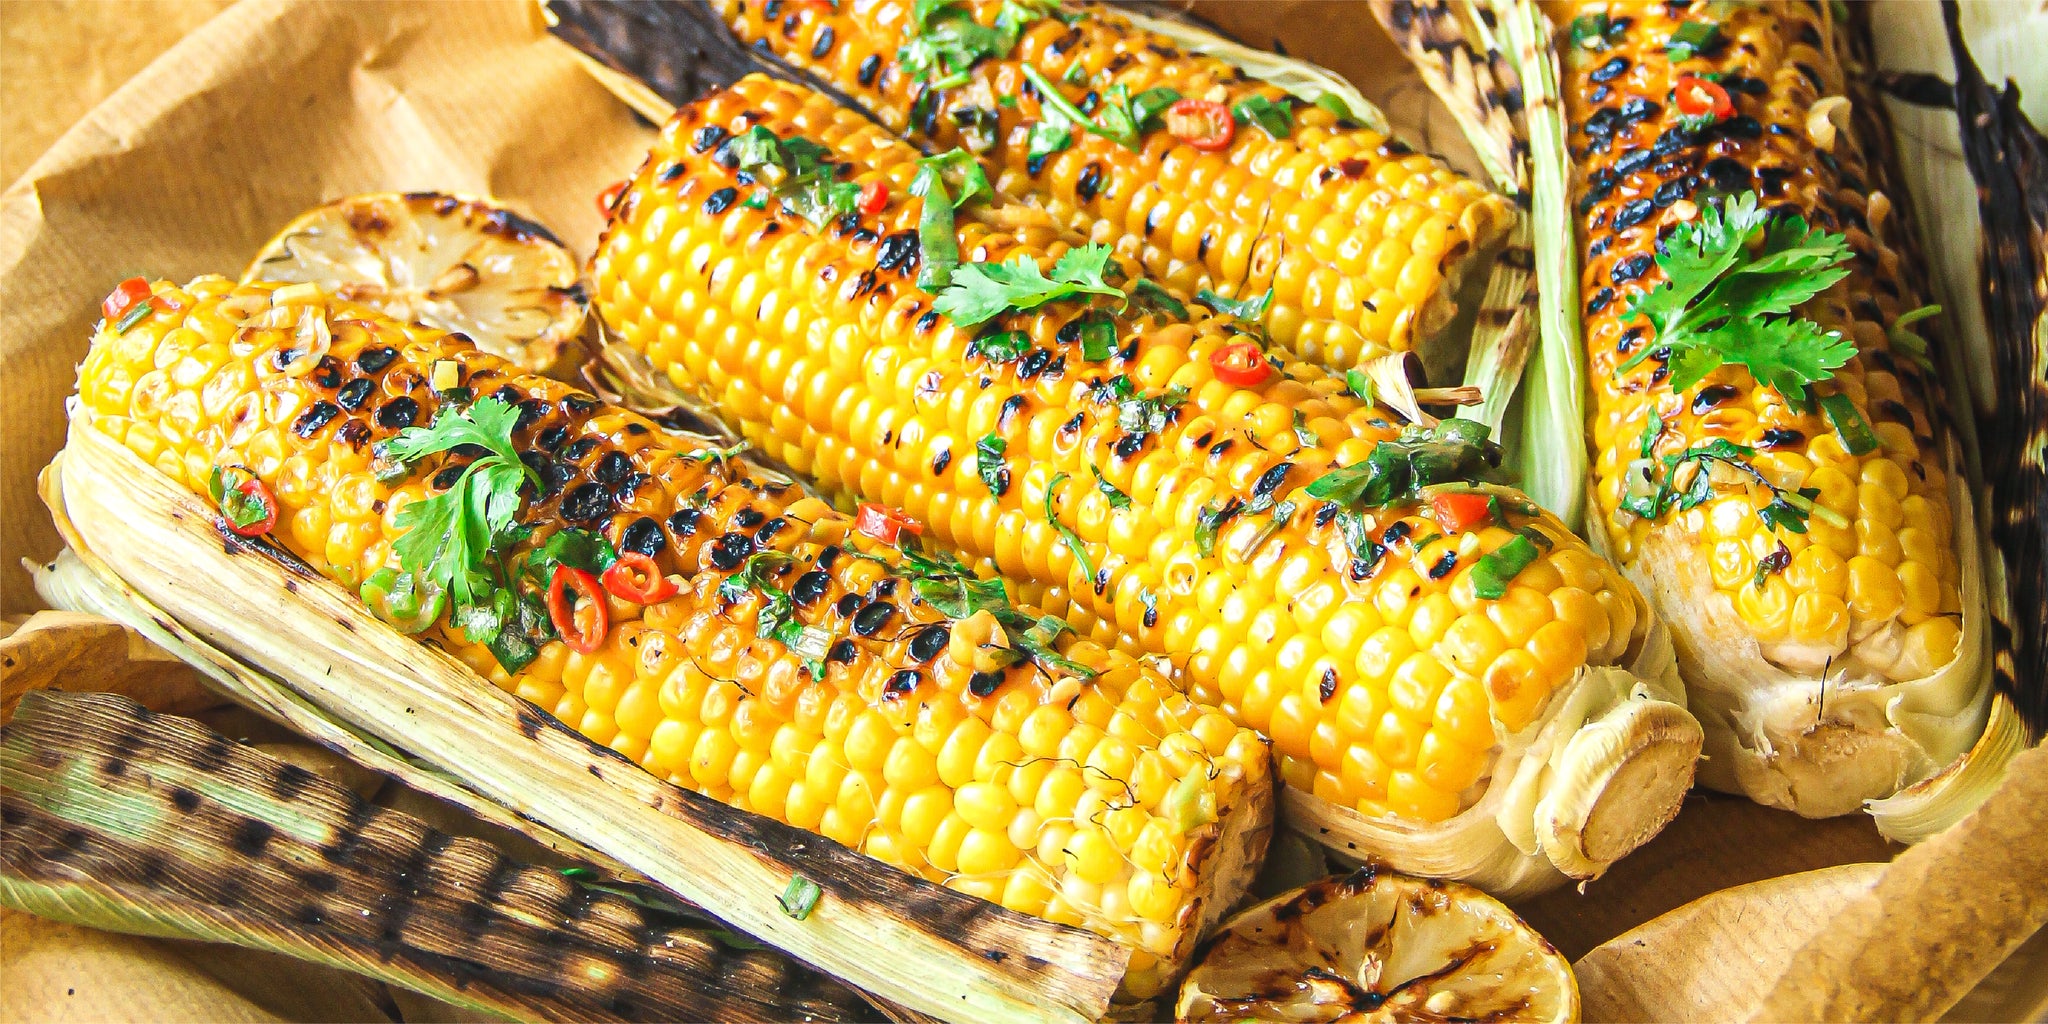 Braaied Corn On The Cob with Jalapeño Chilli and Herb Butter Rub